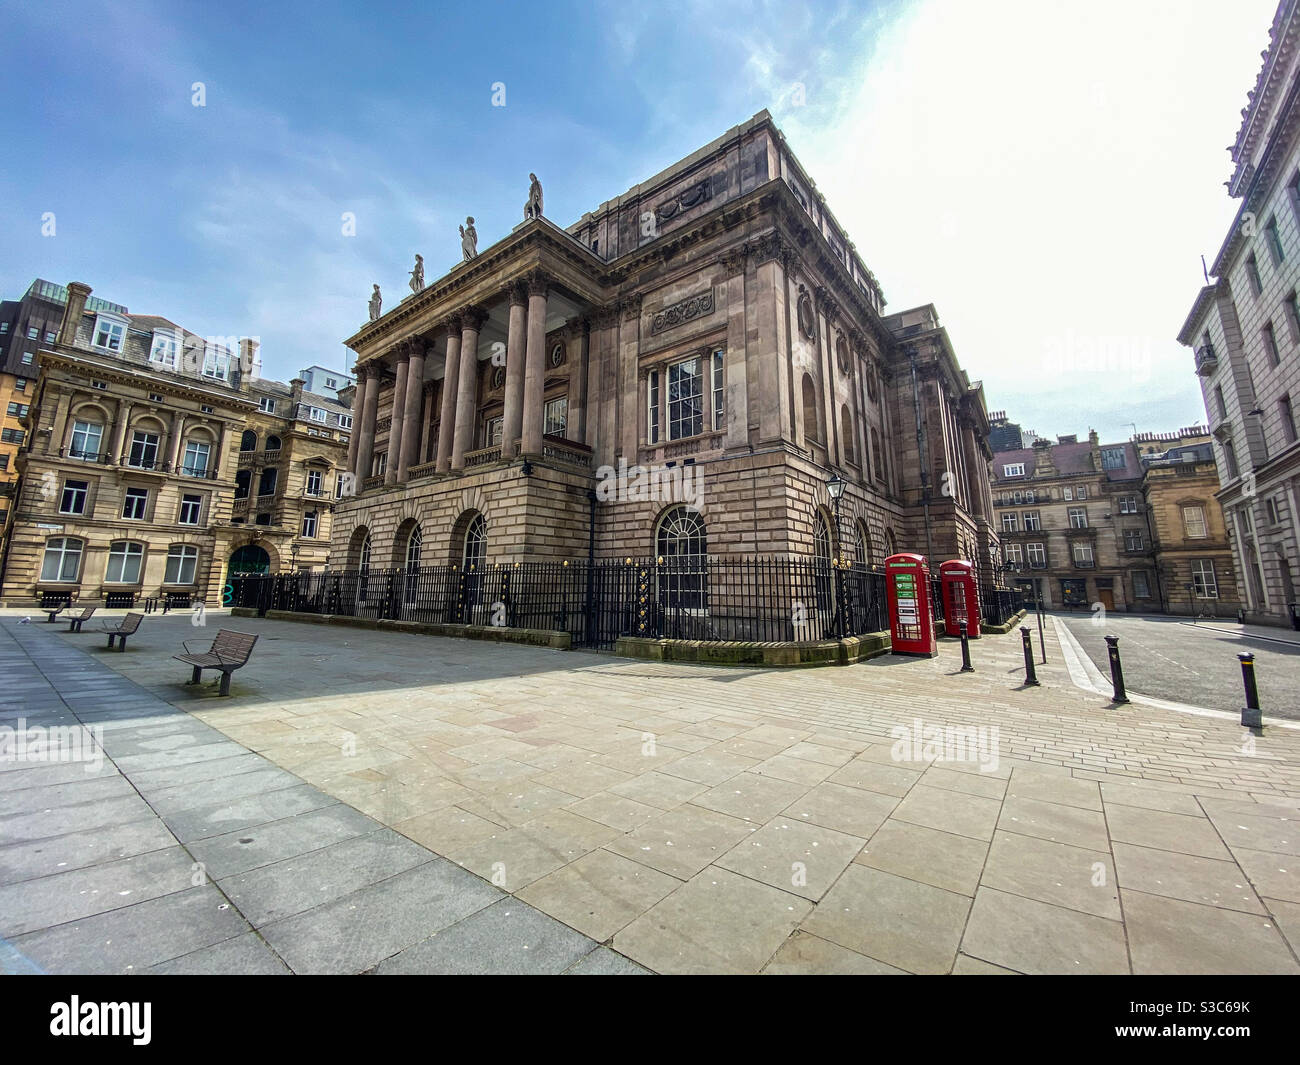 Liverpool town hall taken from exchange flags with no people around due to the coronavirus pandemic outbreak lockdown. There is empty benches & two iconic British red telephone boxes on the street Stock Photo